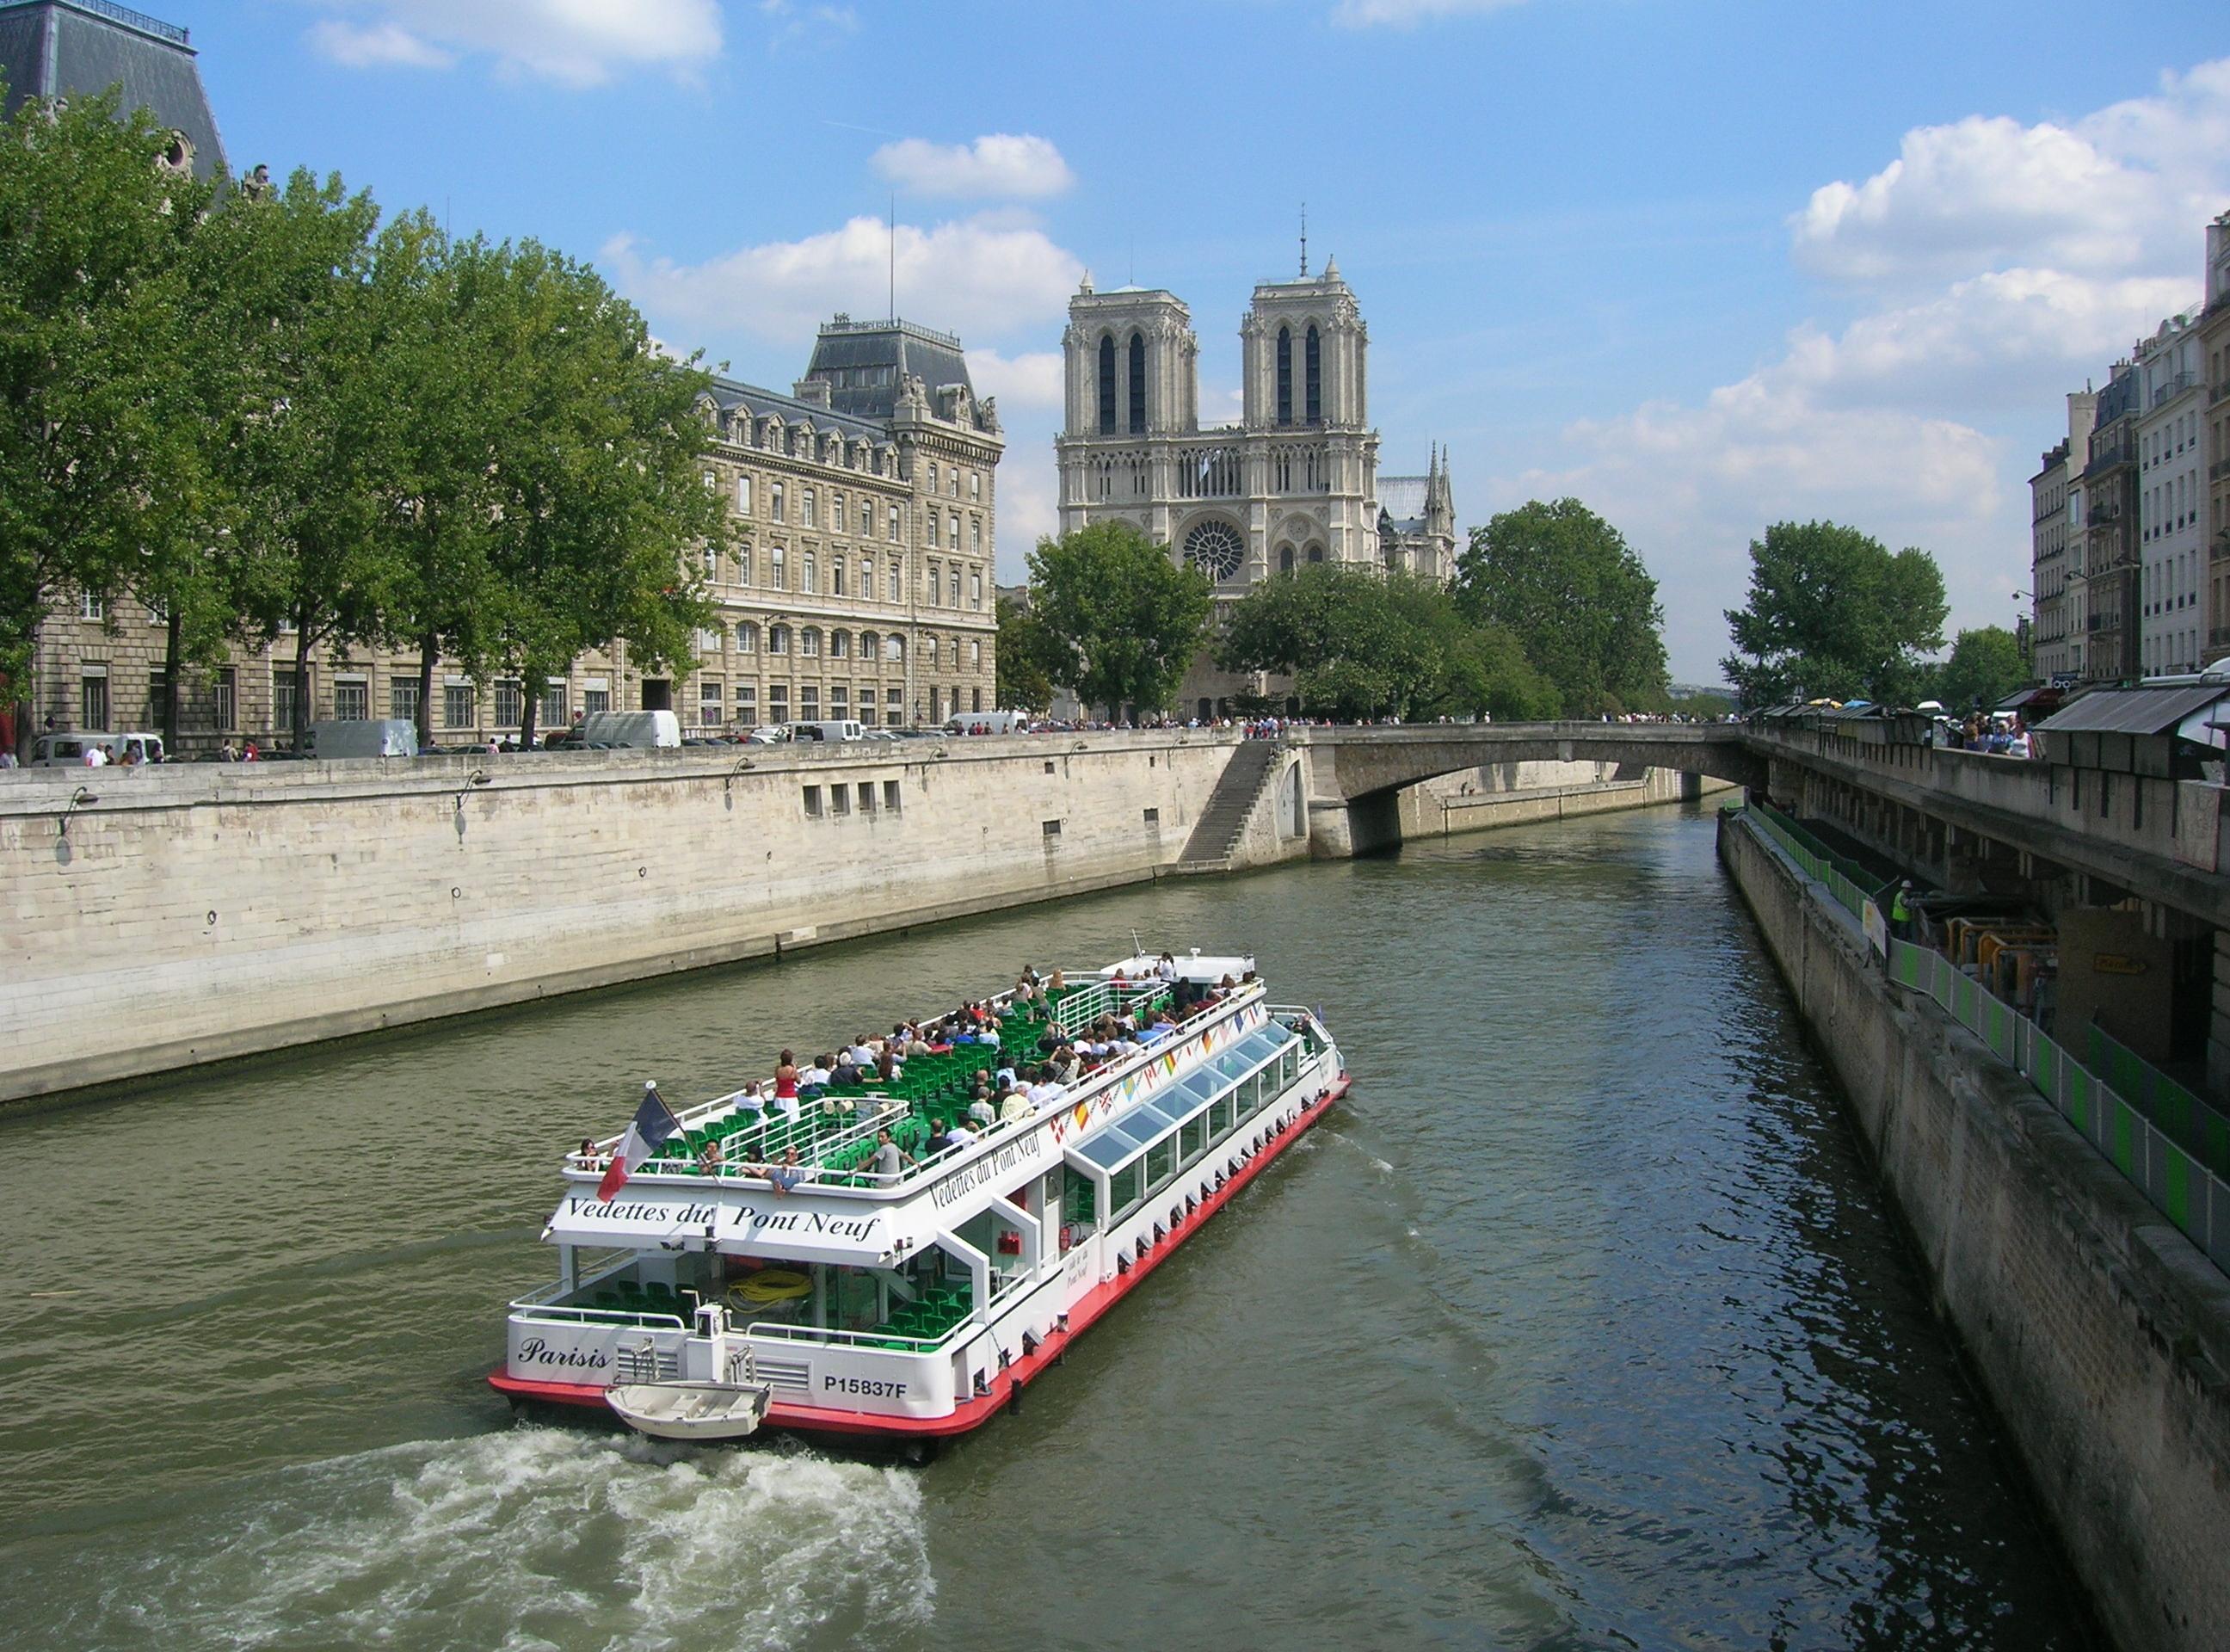 Notre Dame + The Louvre Museum + Seine Lunch Cruise + Tour of Montmartre – Hotel pick-up/drop-off